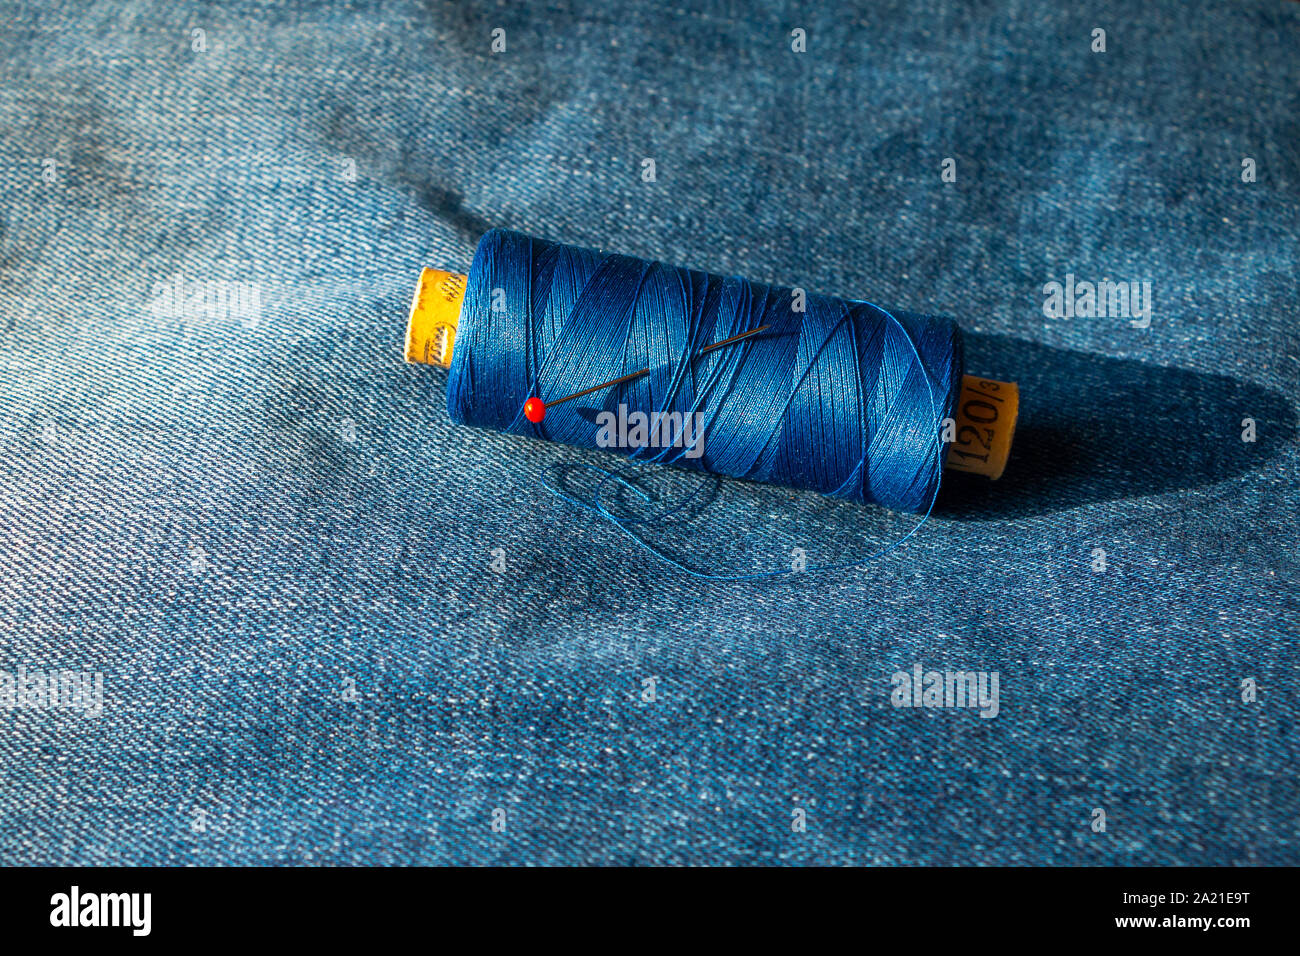 Spool of thread on a blue jeans with a round head pin put in the spool, picture taken in the Netherlands Stock Photo